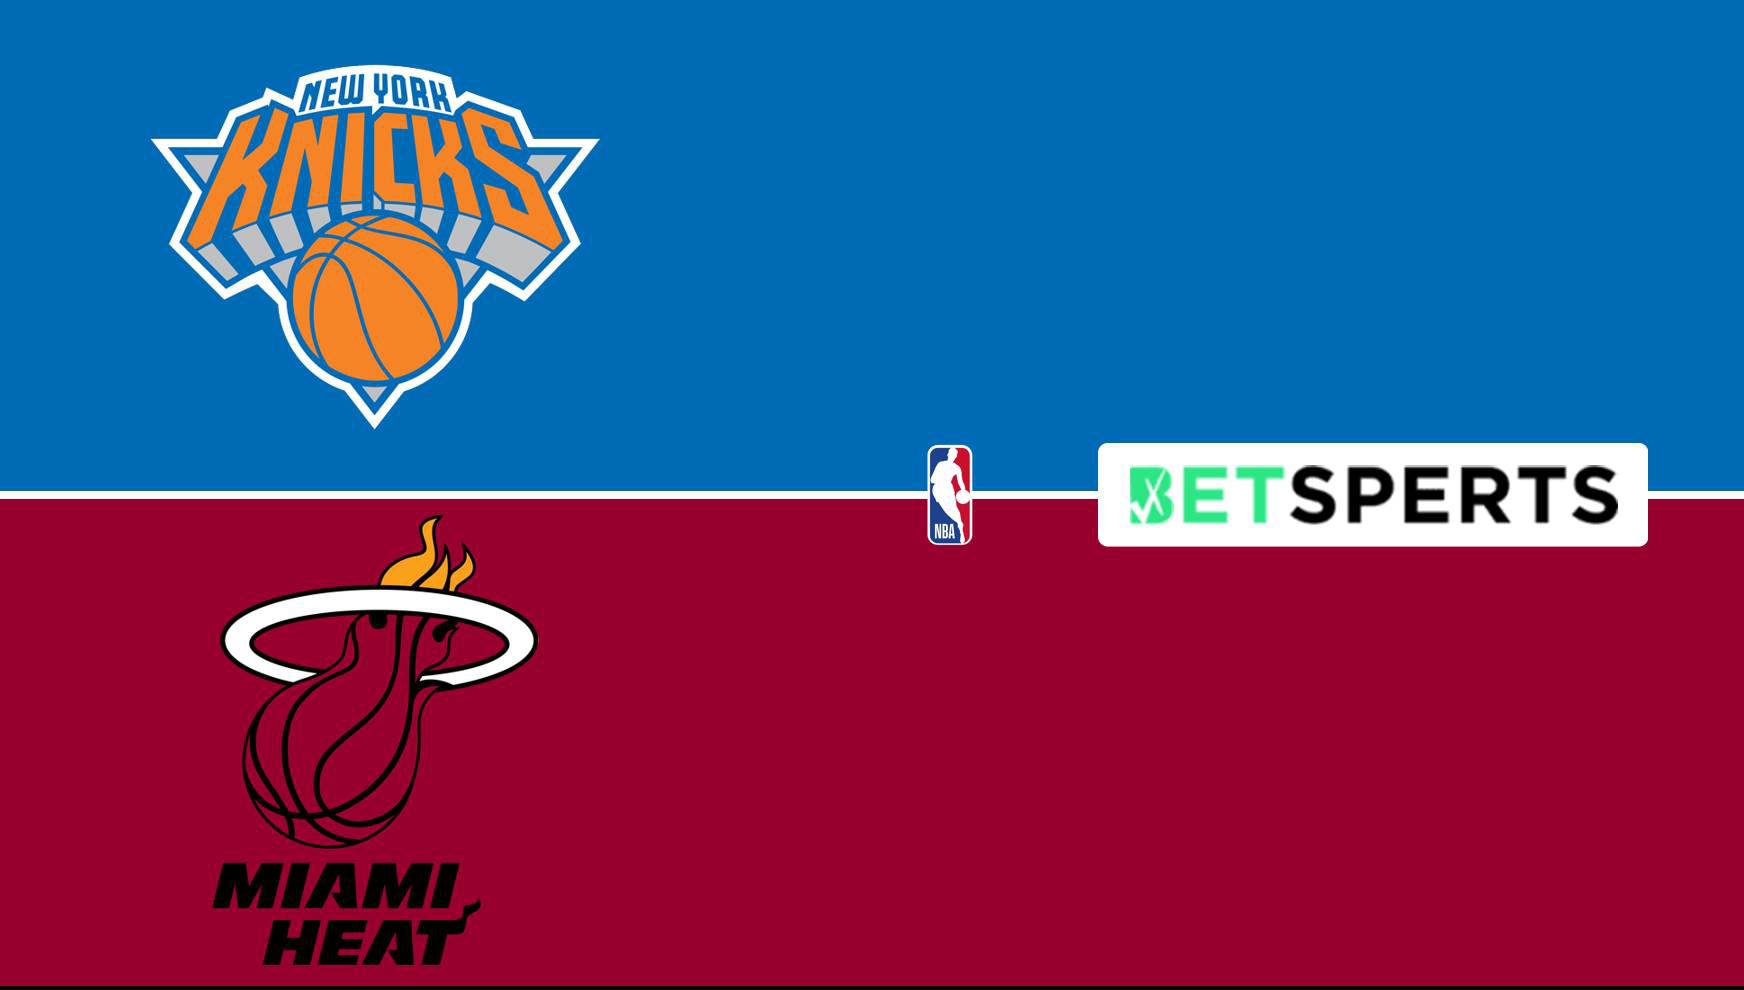 Miami Heat and New York Knicks ready to square off in conference